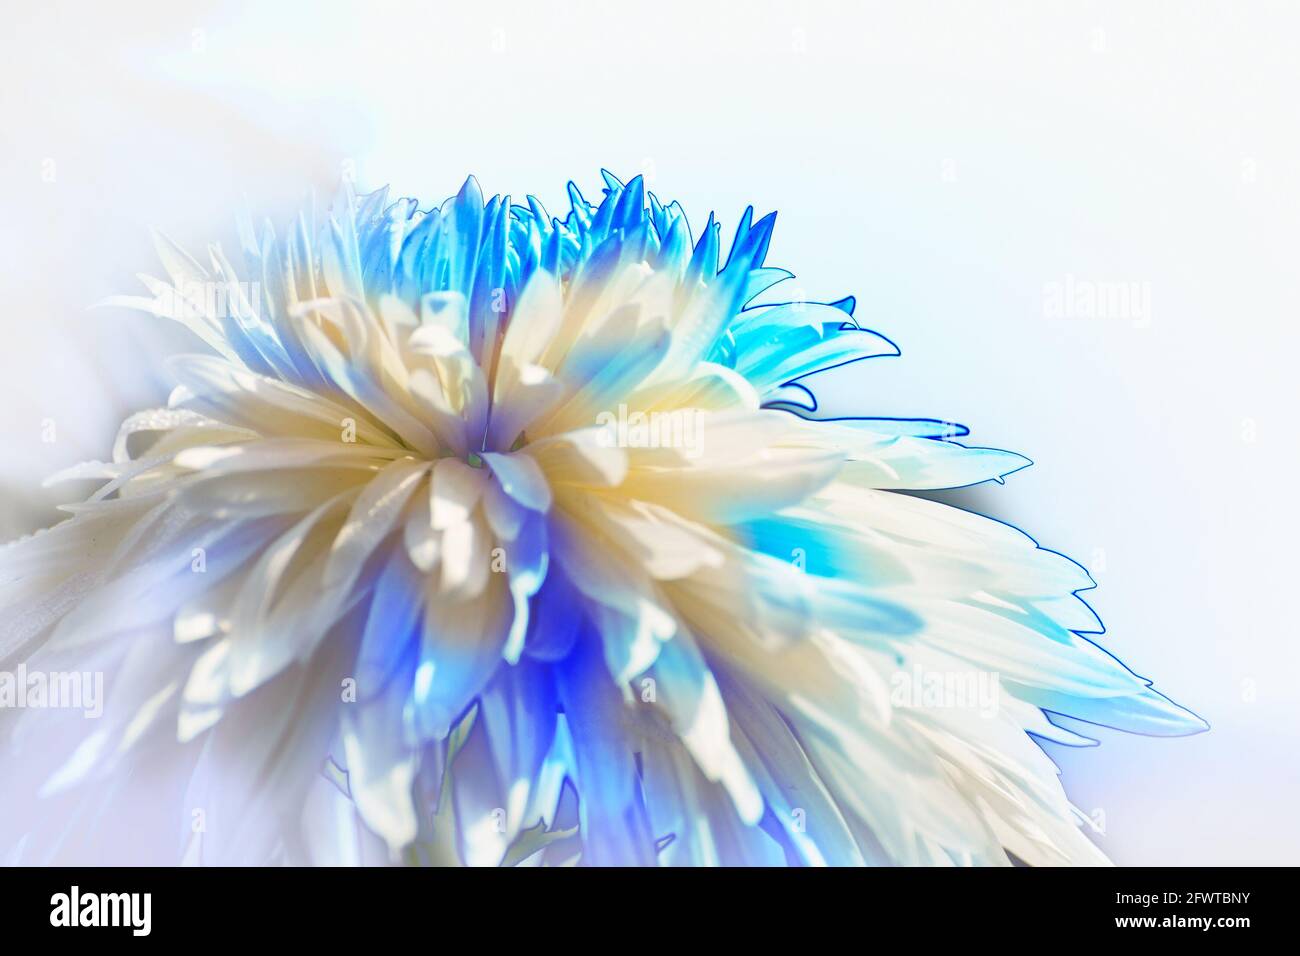 Artistic flower image, off white dahlia flower petals with white back ground, nature stock photograph Stock Photo